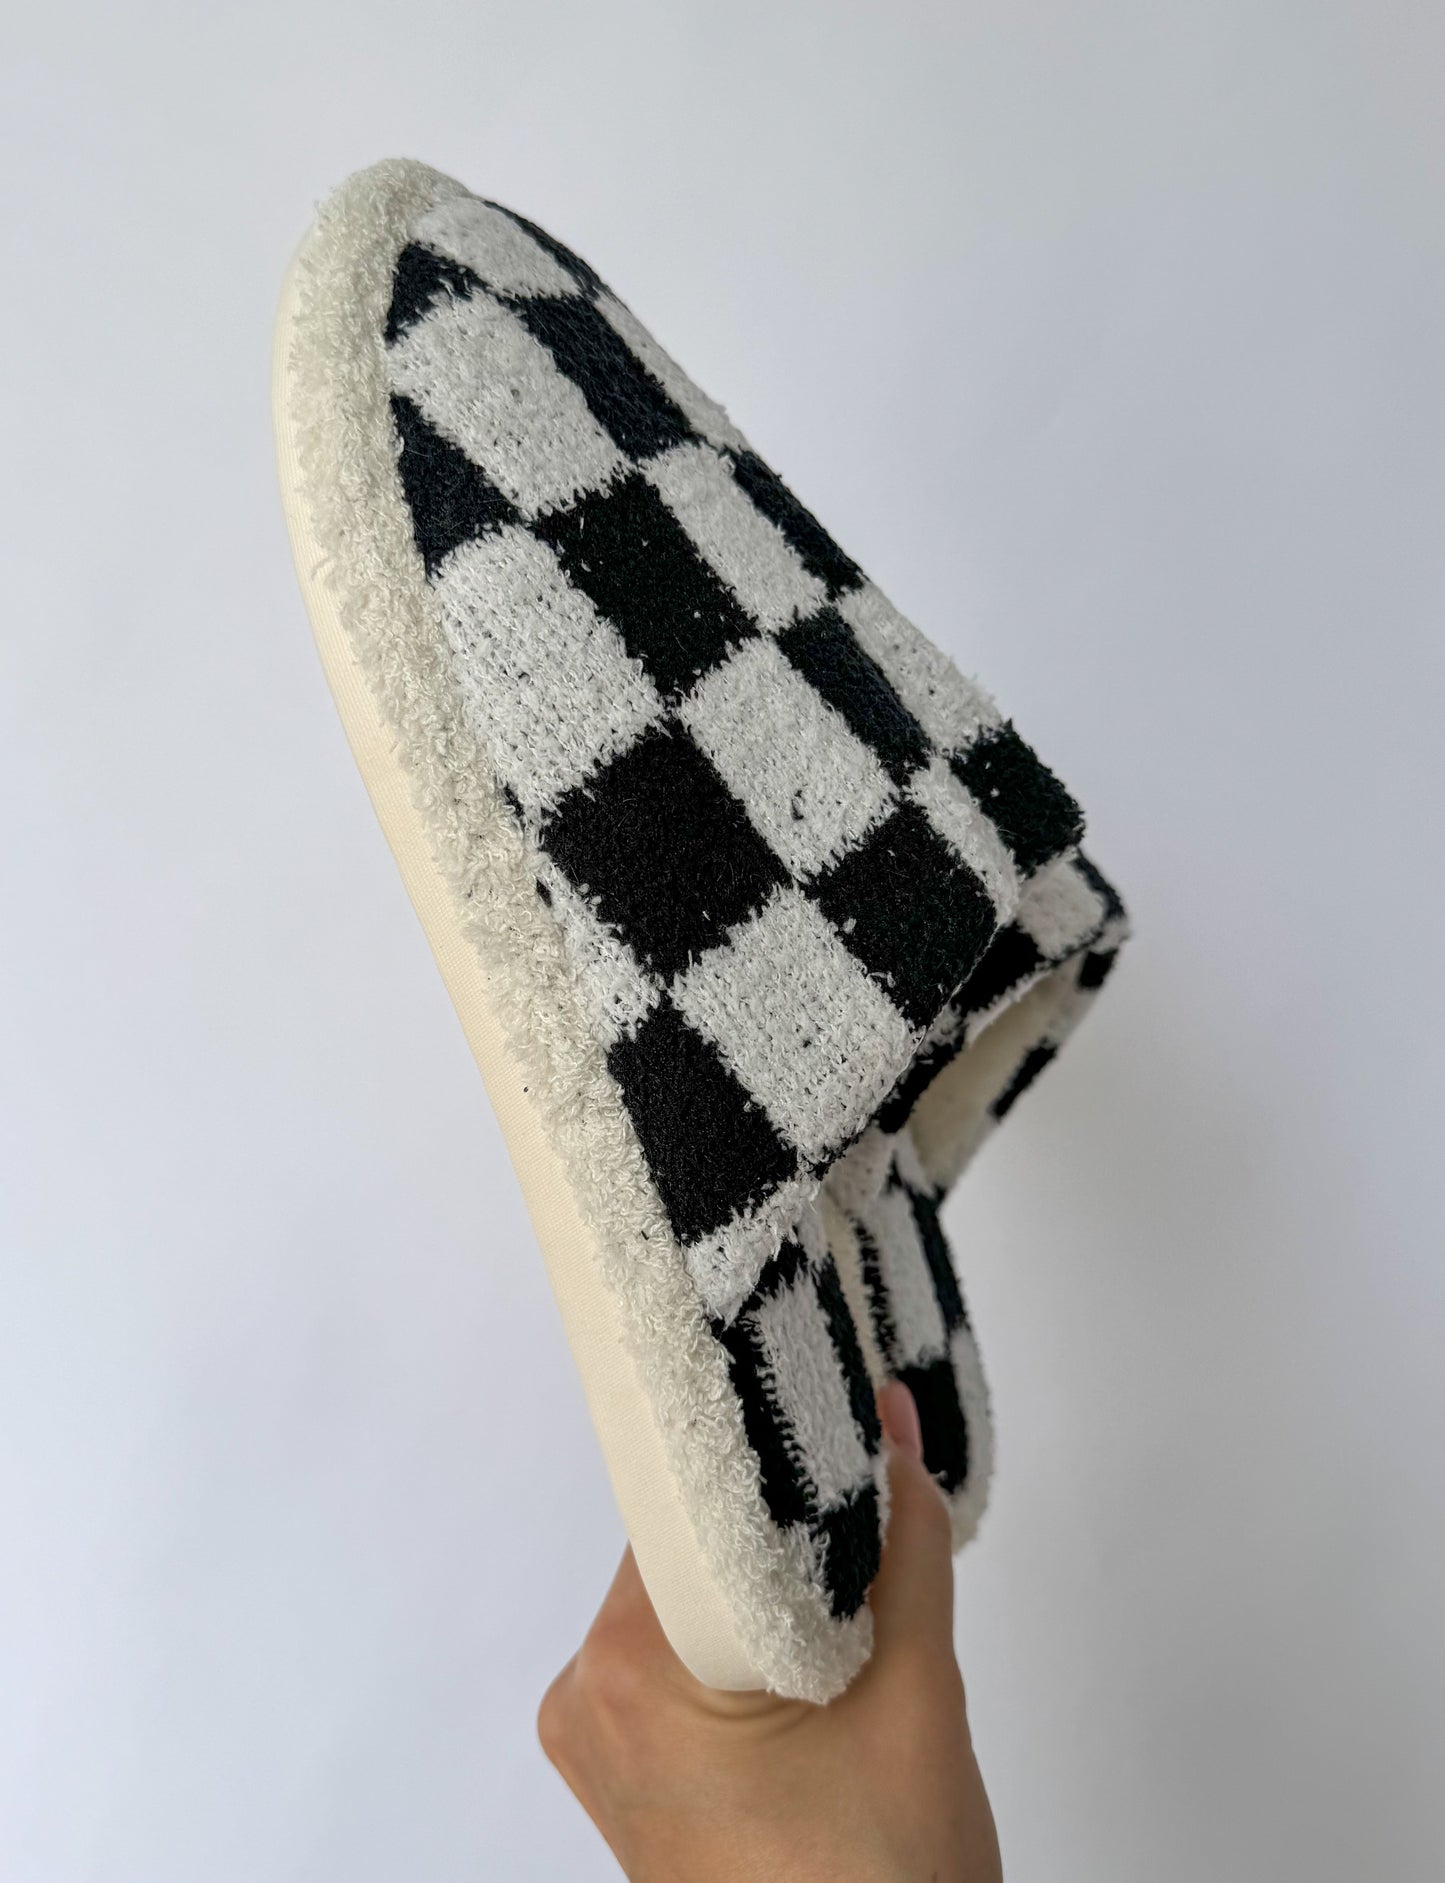 Checkered Cozy Slippers